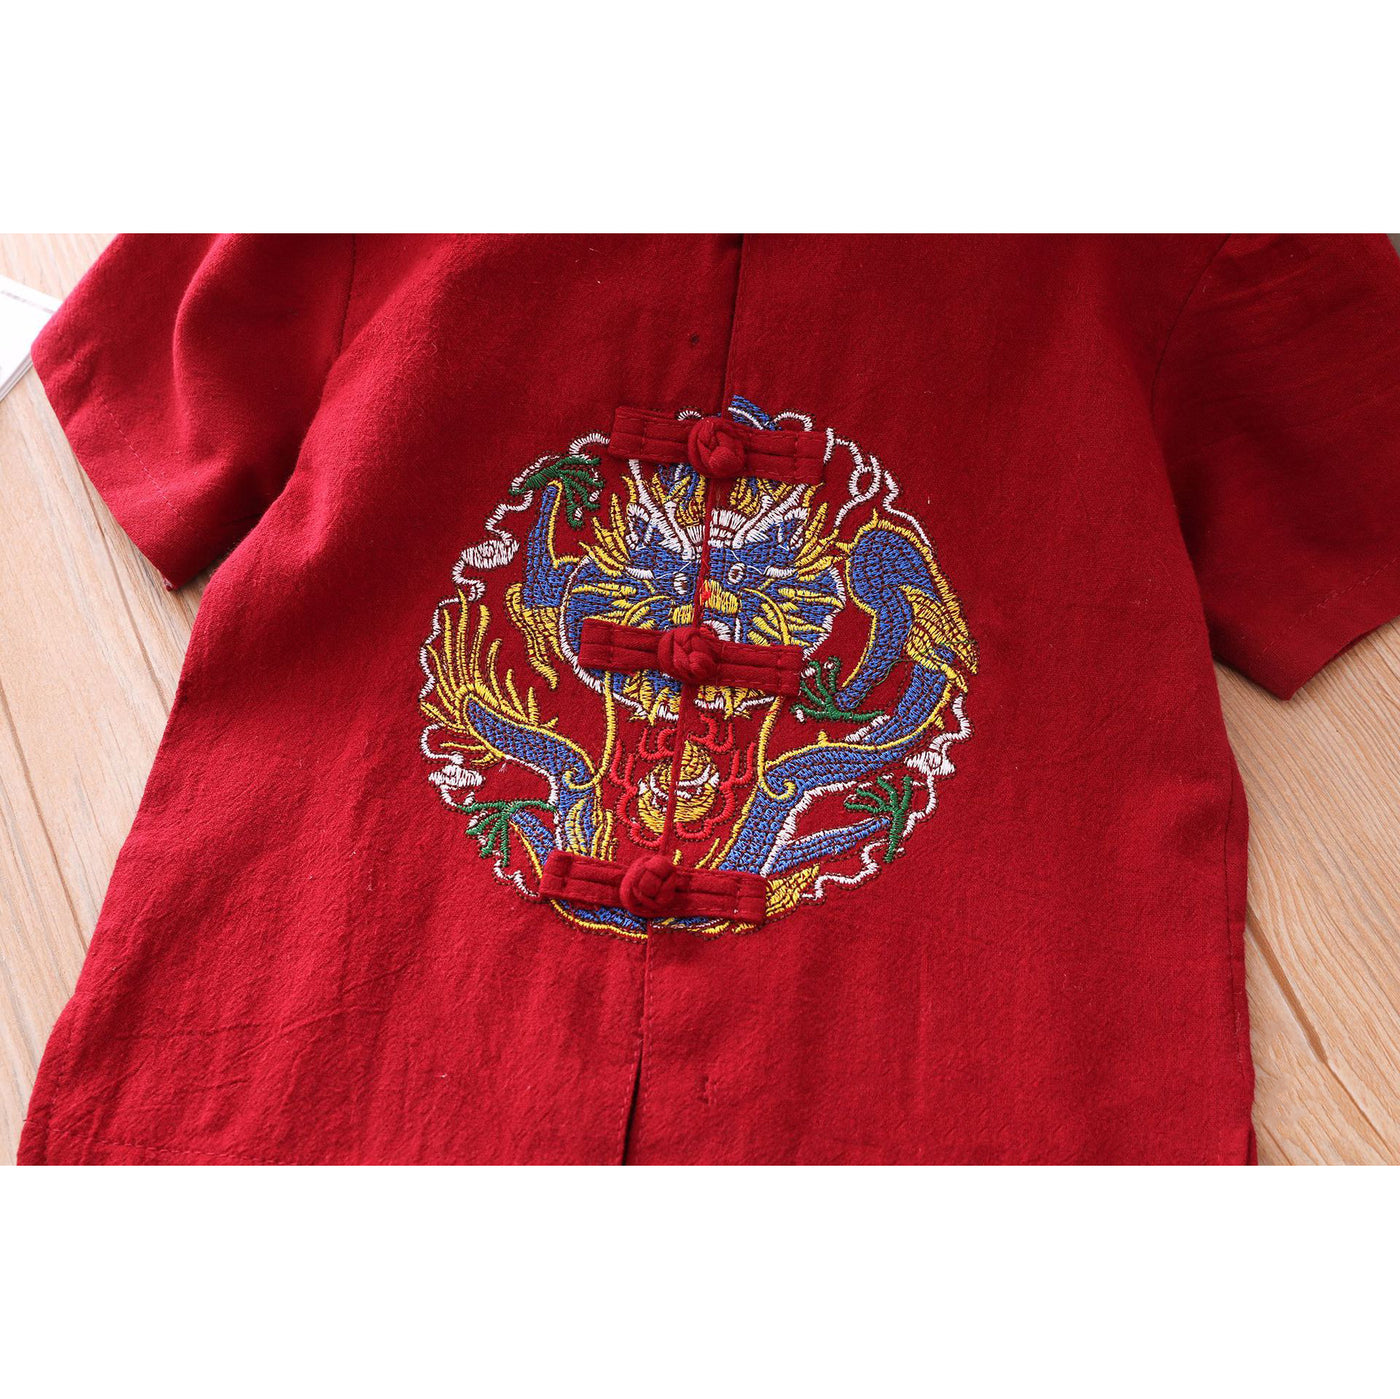 [KB09] Boys Cheongsam Set Embroidered Dragon Front Buttons CNY Chinese New Year Outfit - Little Kooma